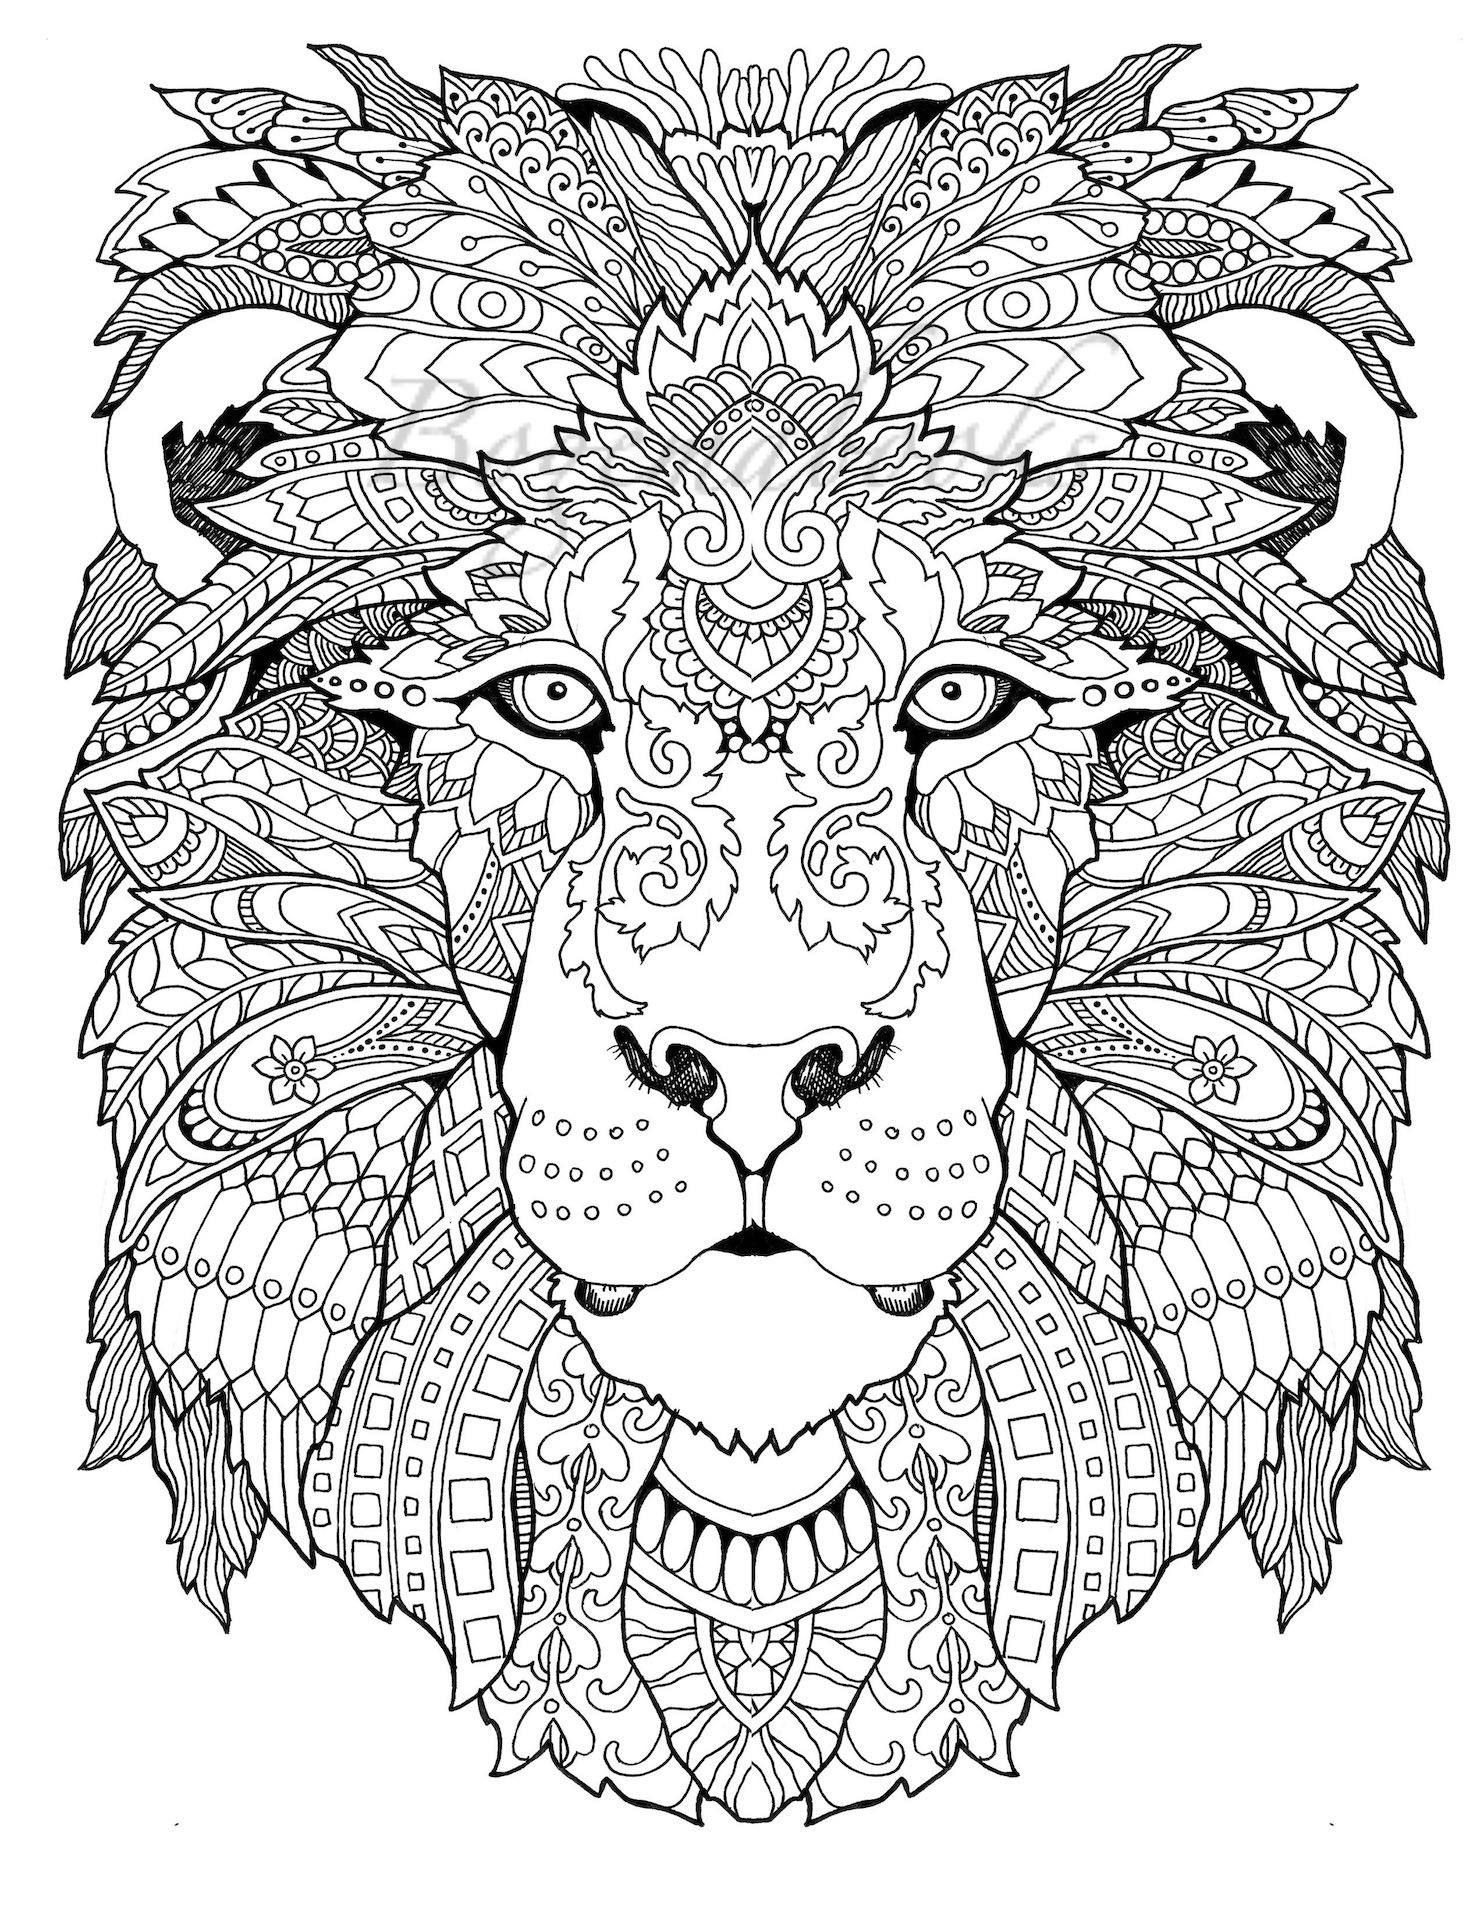 Free Adult Coloring Book Pdf
 Awesome Animals Adult Coloring pages Coloring pages